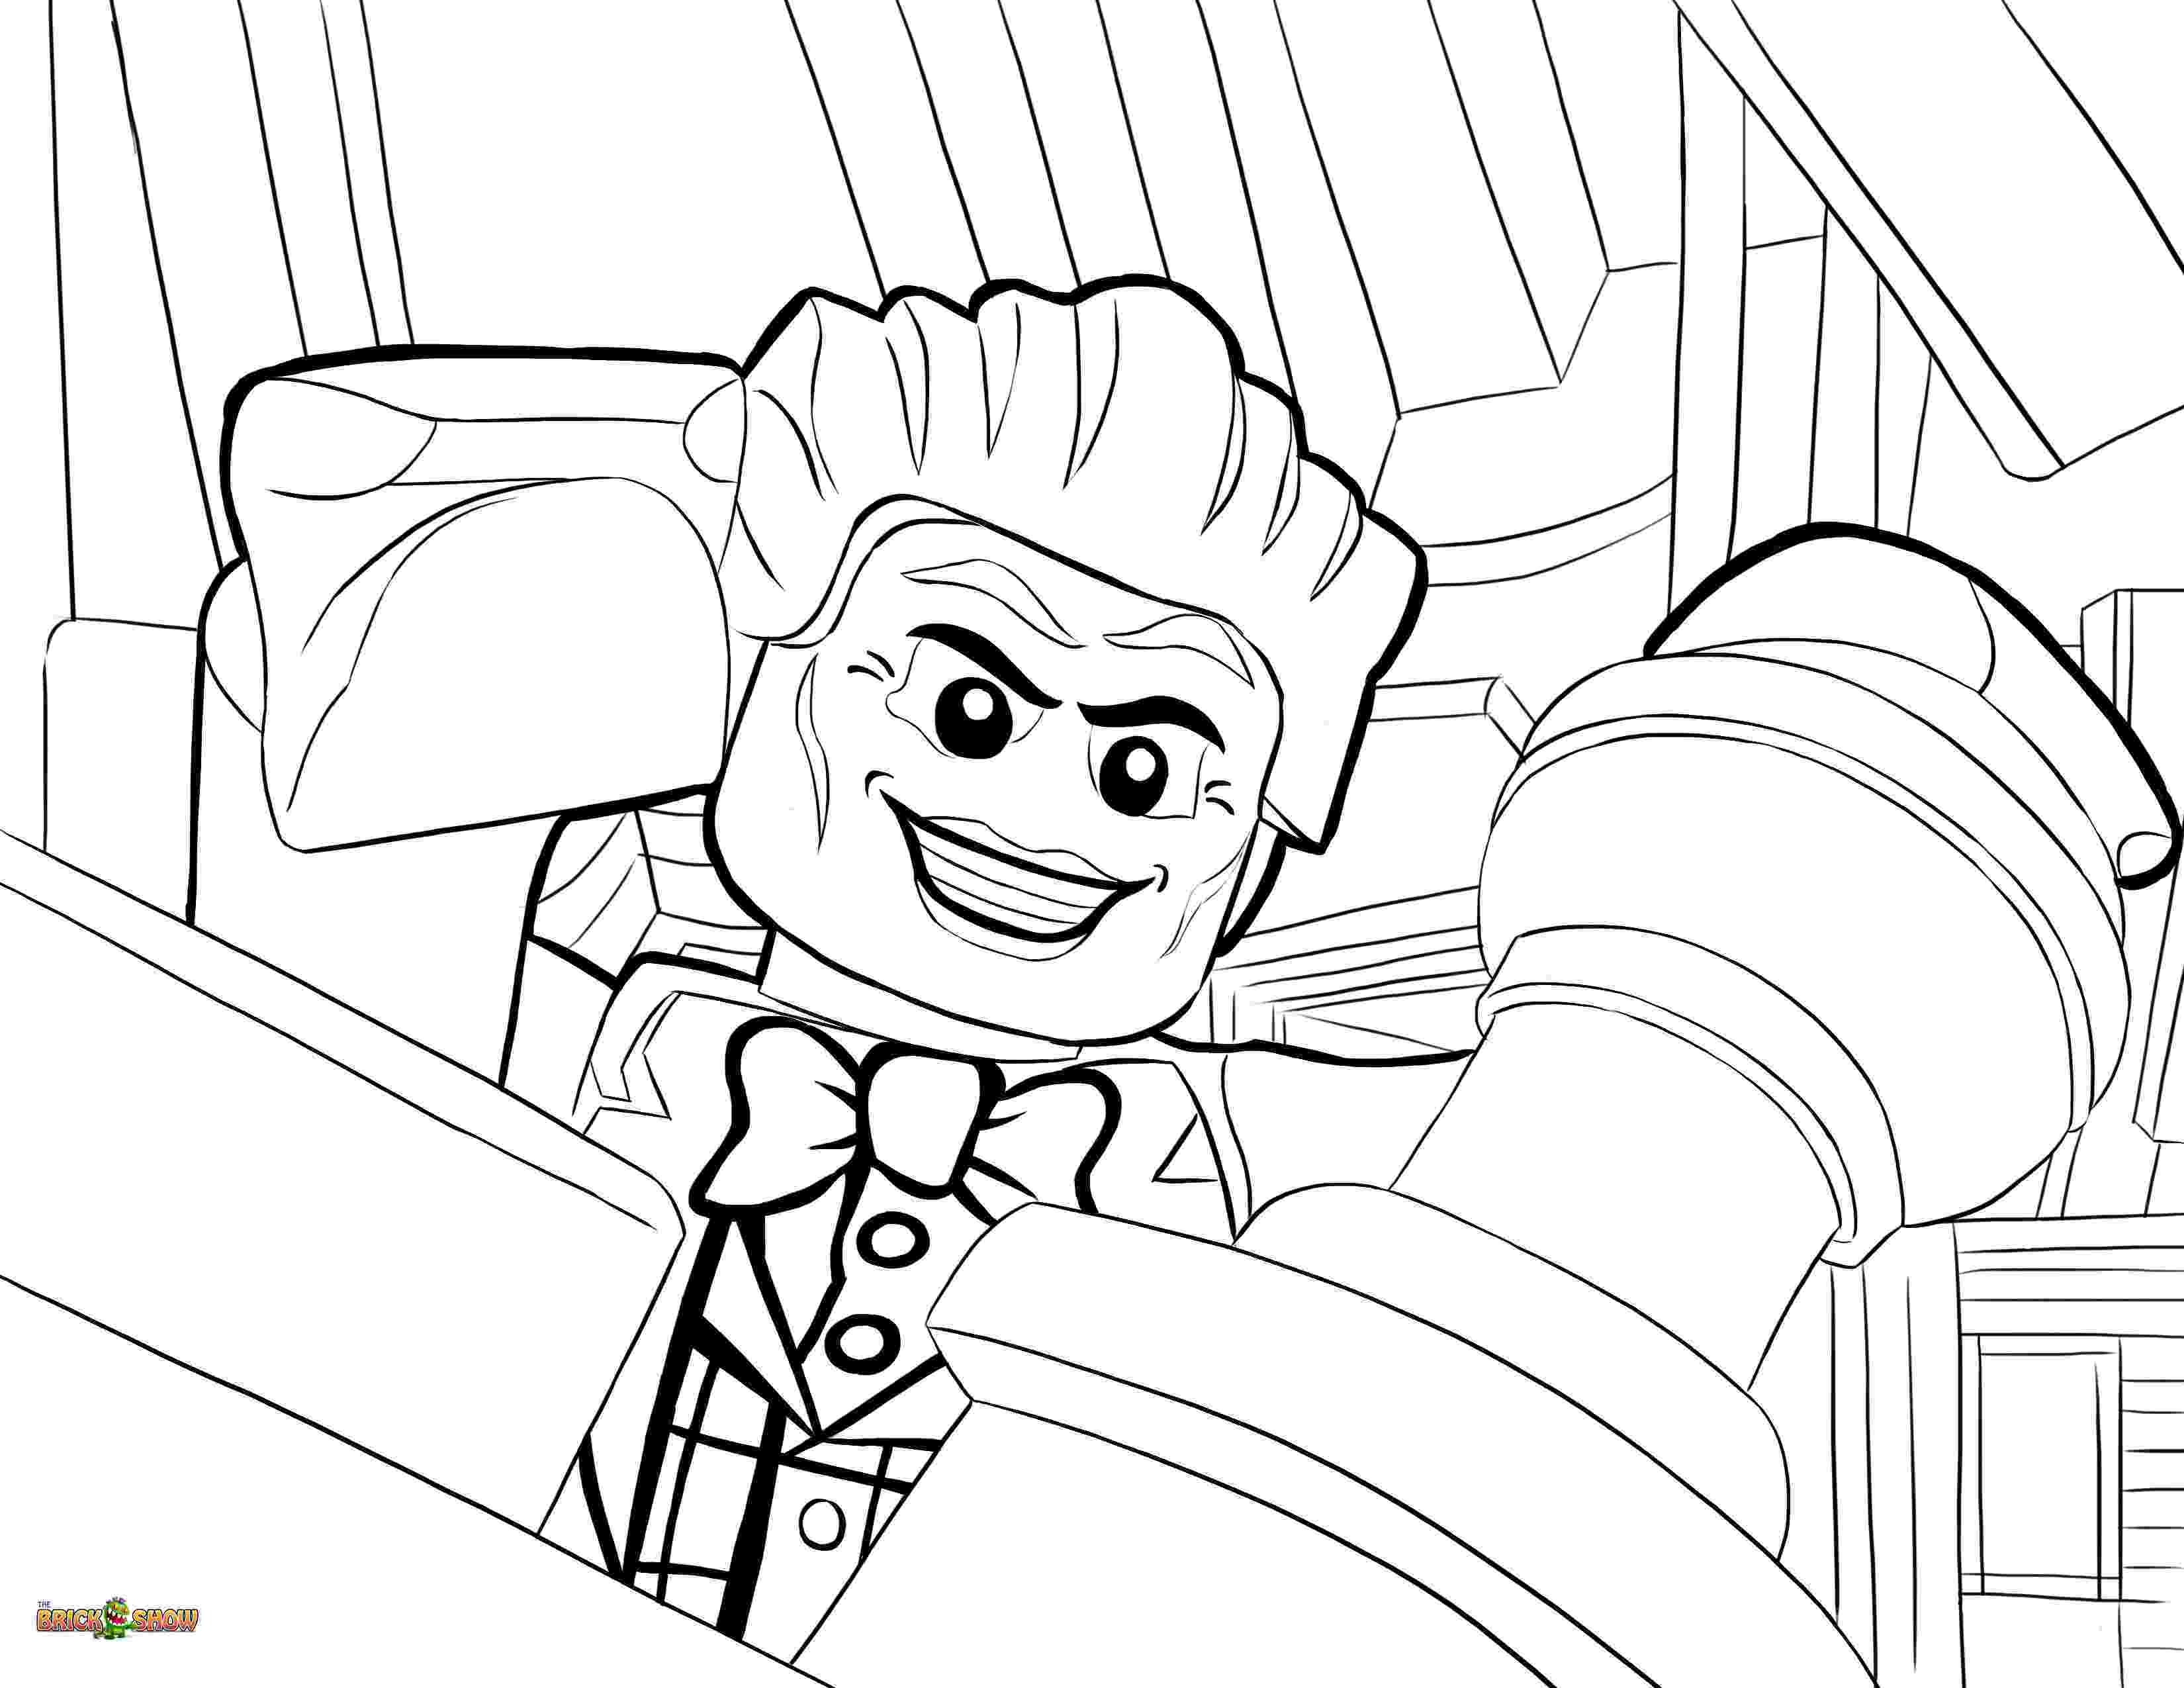 lego color sheets lego batman coloring pages to download and print for free lego color sheets 